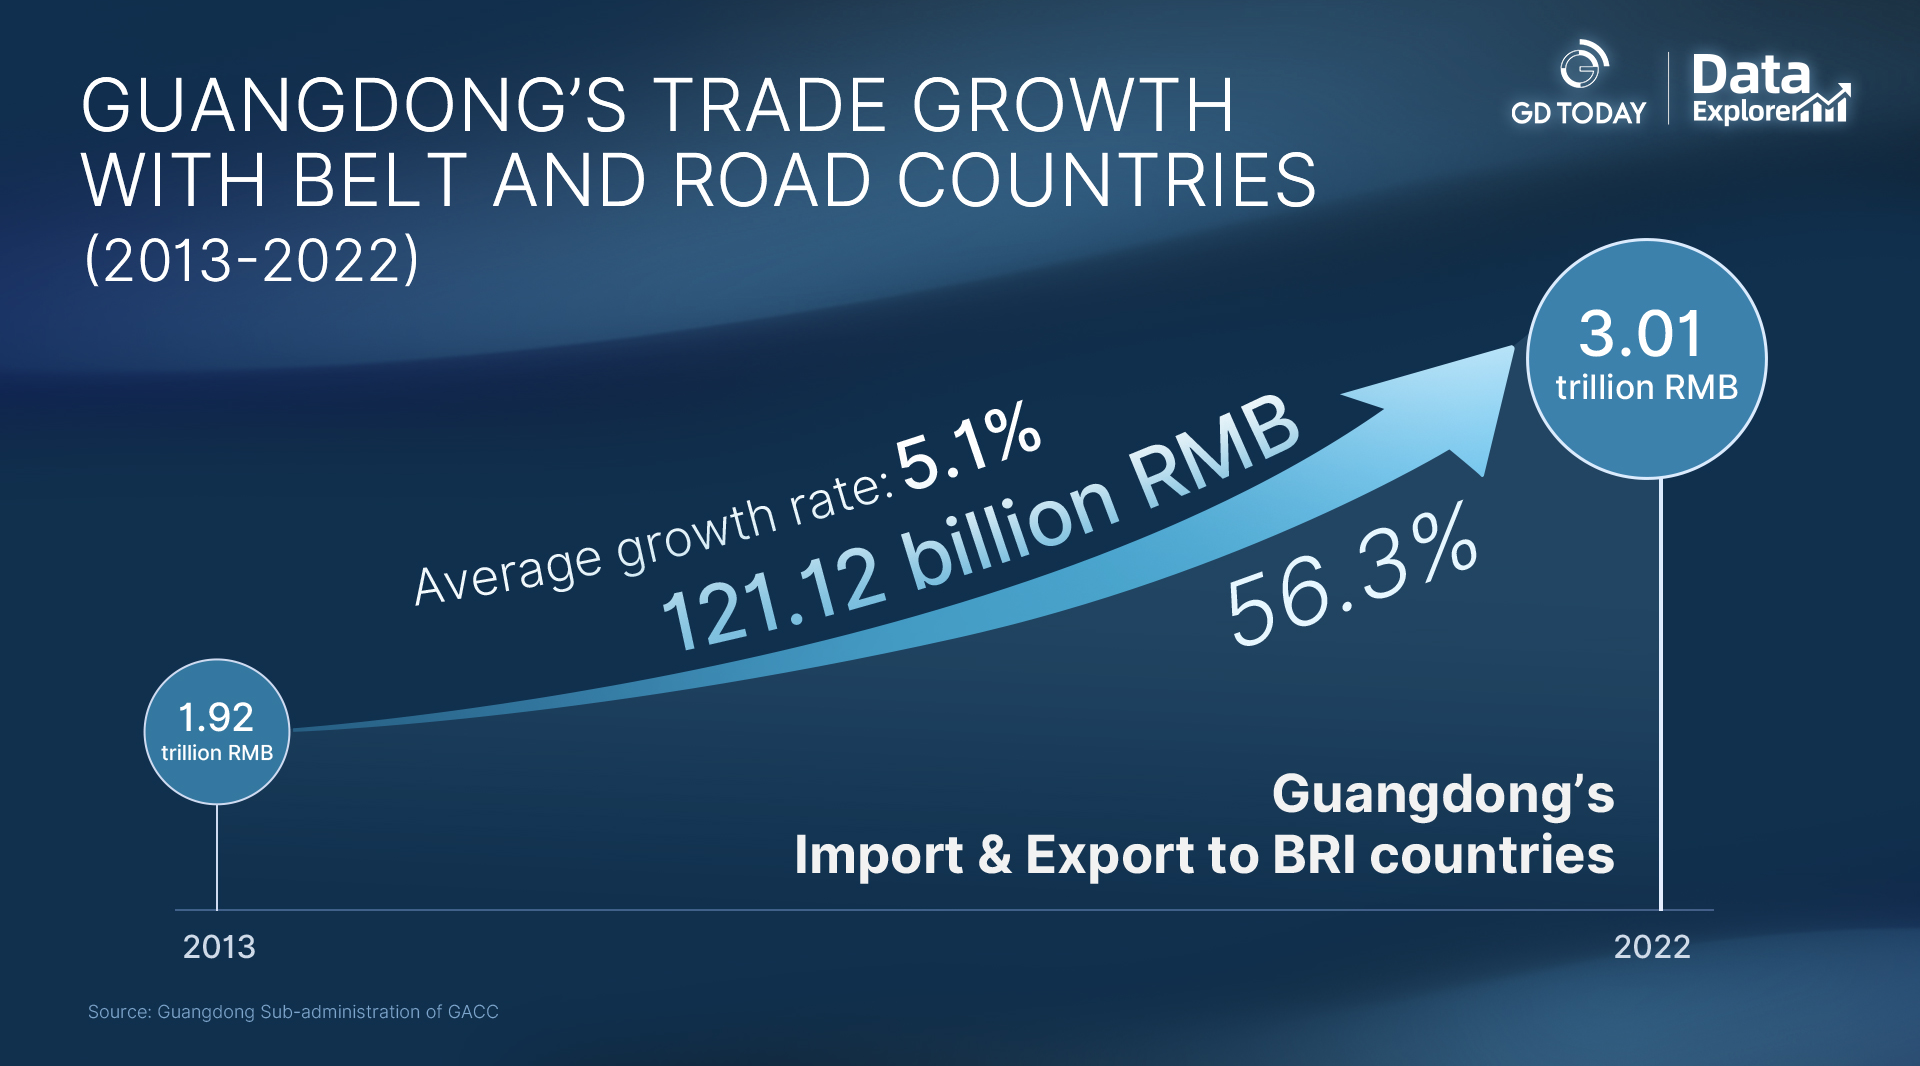 Data explorer | Guangdong’s trade with BRI countries up 56.3% in the past decade